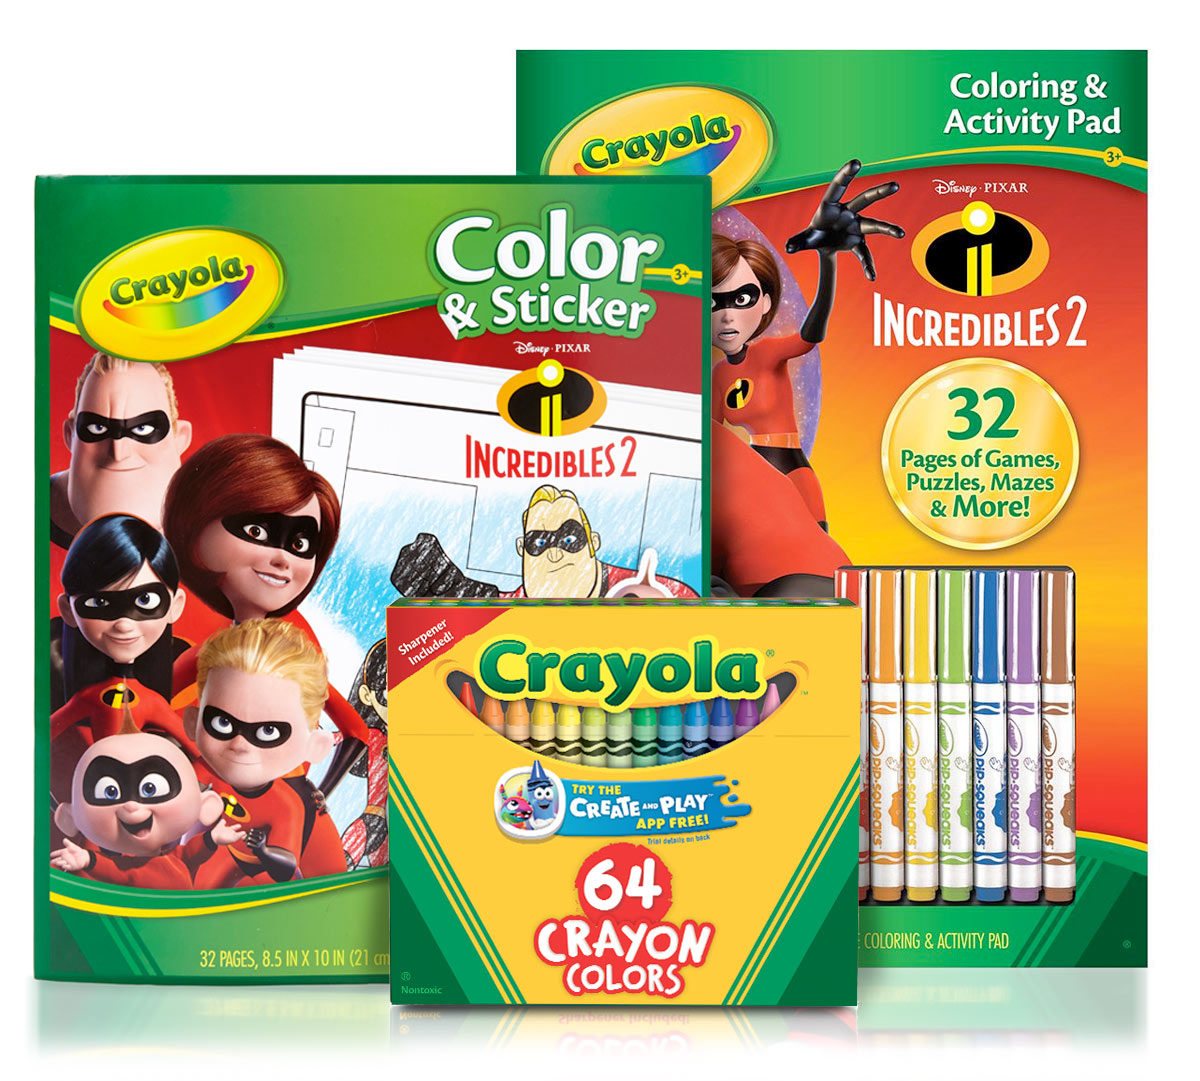 Arts and Crafts 6 and Up Ages 3,4 5 Gifting Gift for Boys and Girls Travel Kids Crayola Disney The Incredibles 2 Giant Colouring Pages Holiday Gifting